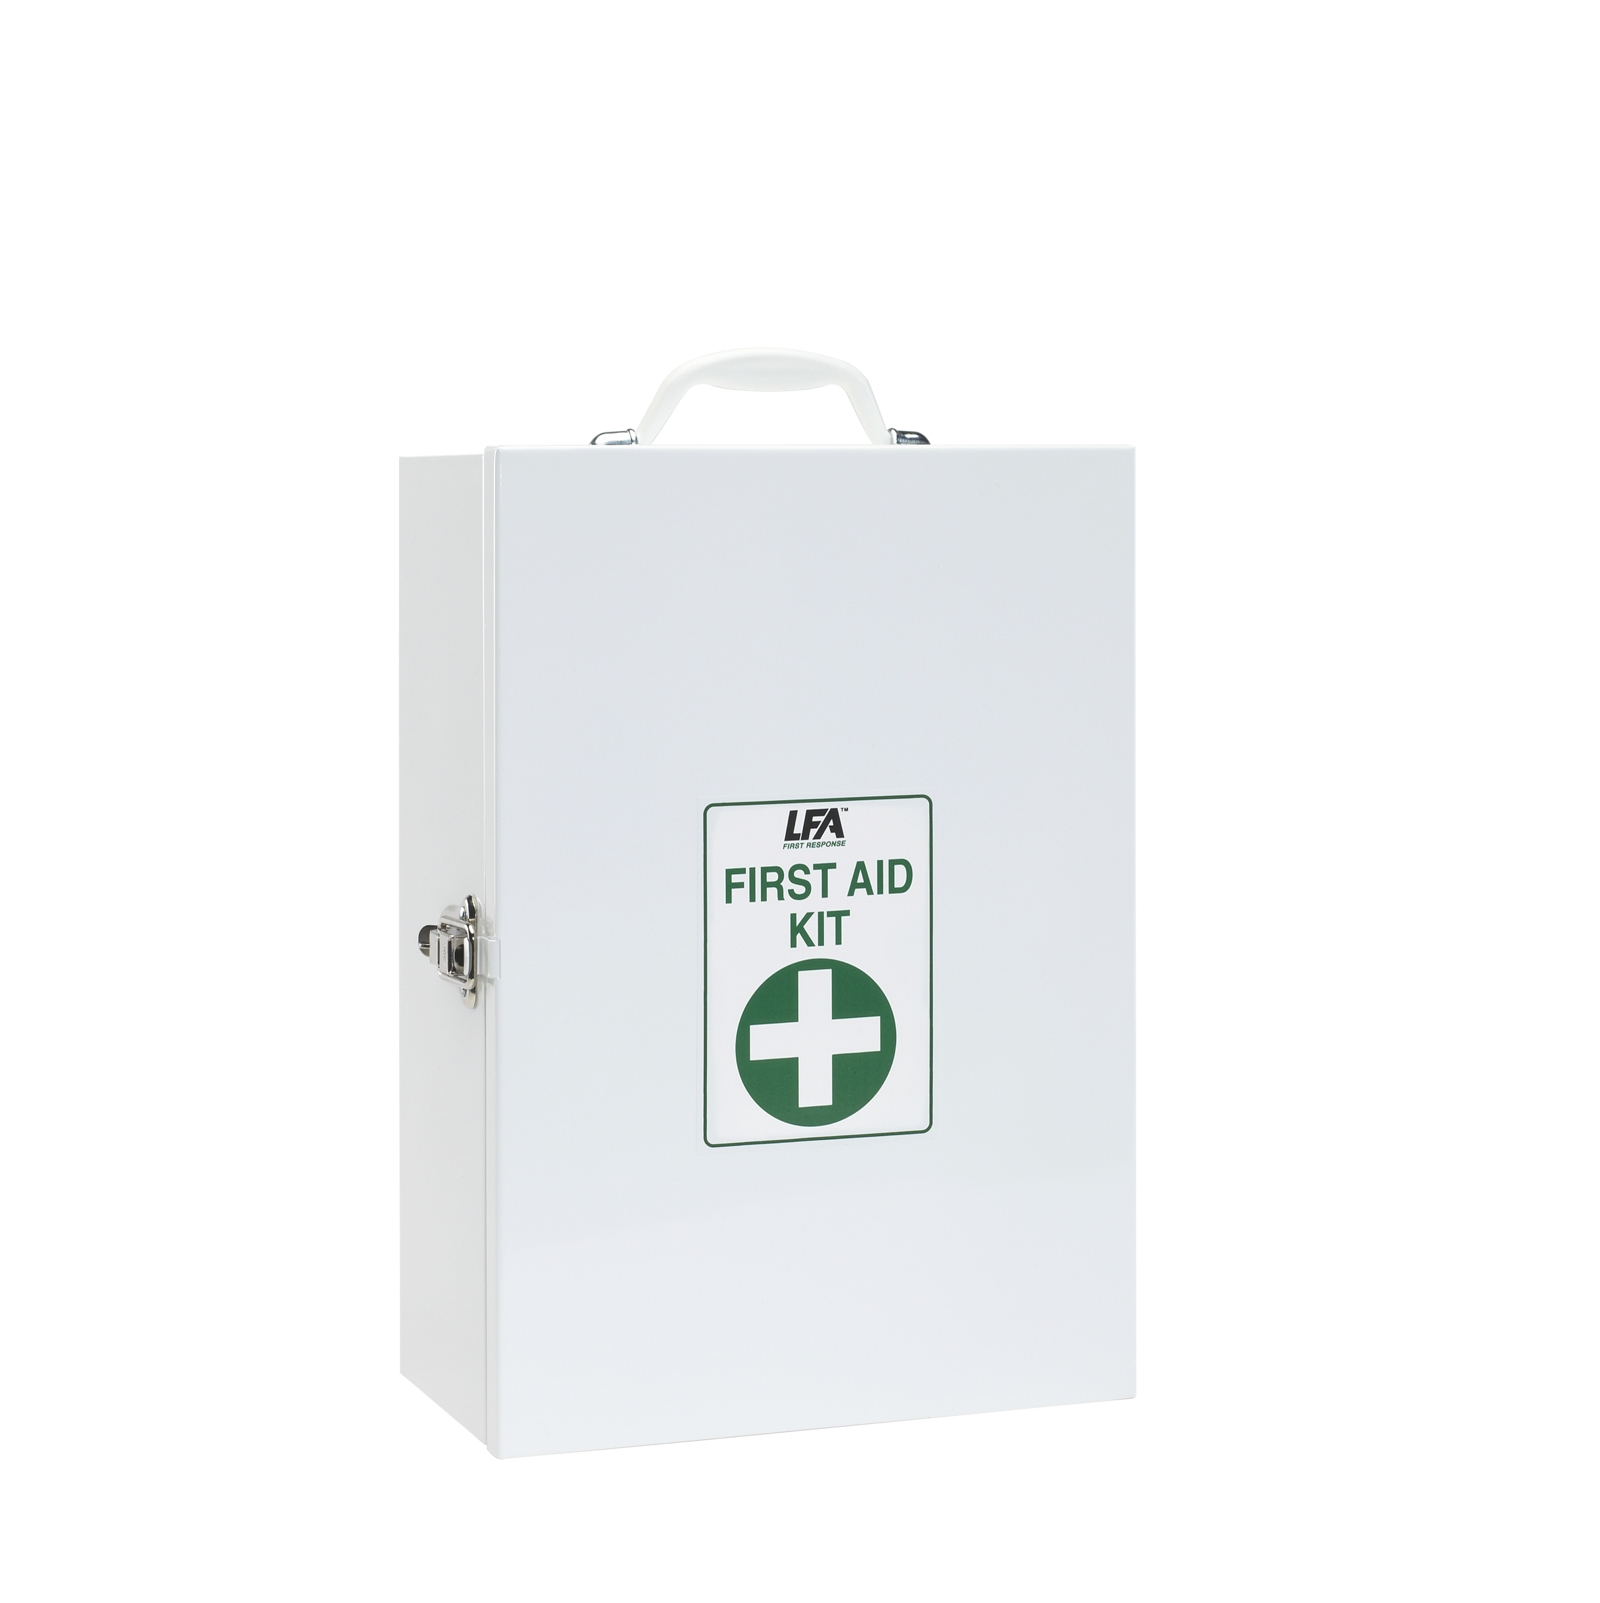 First-Aid Metal Cabinet